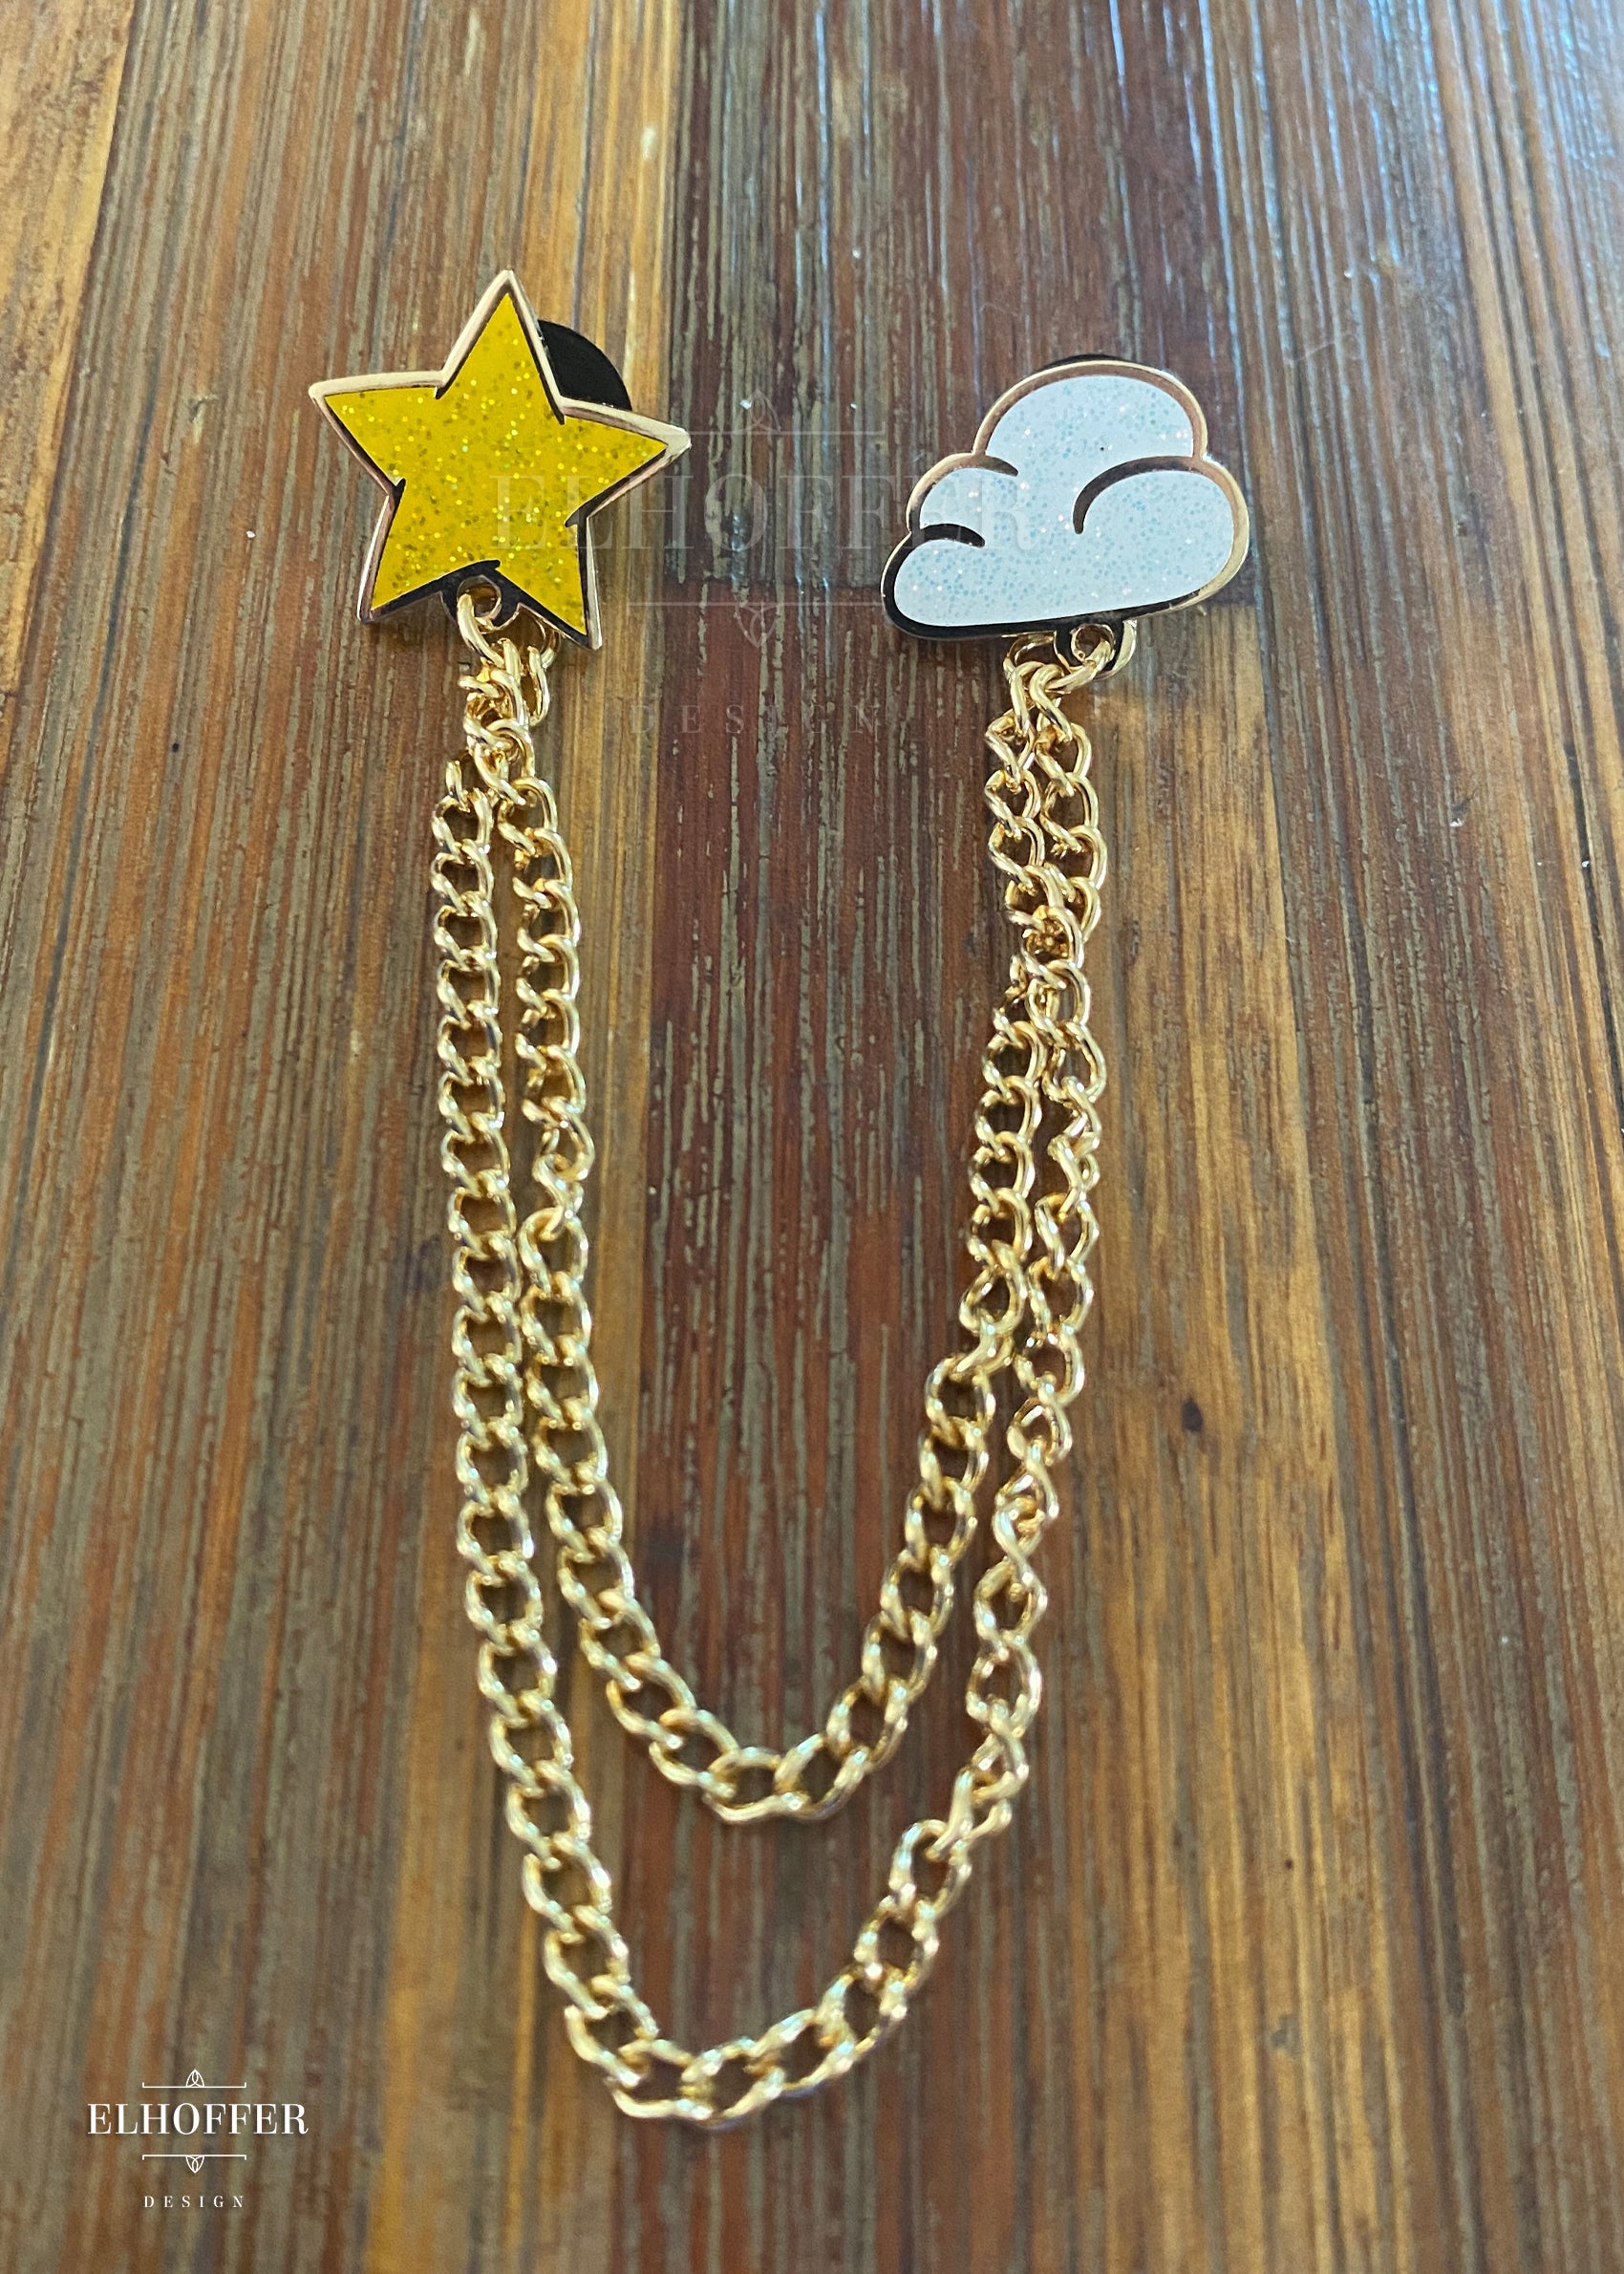 A tiny star pin and a tiny cloud pin connected together with 2 lengths of gold chain.